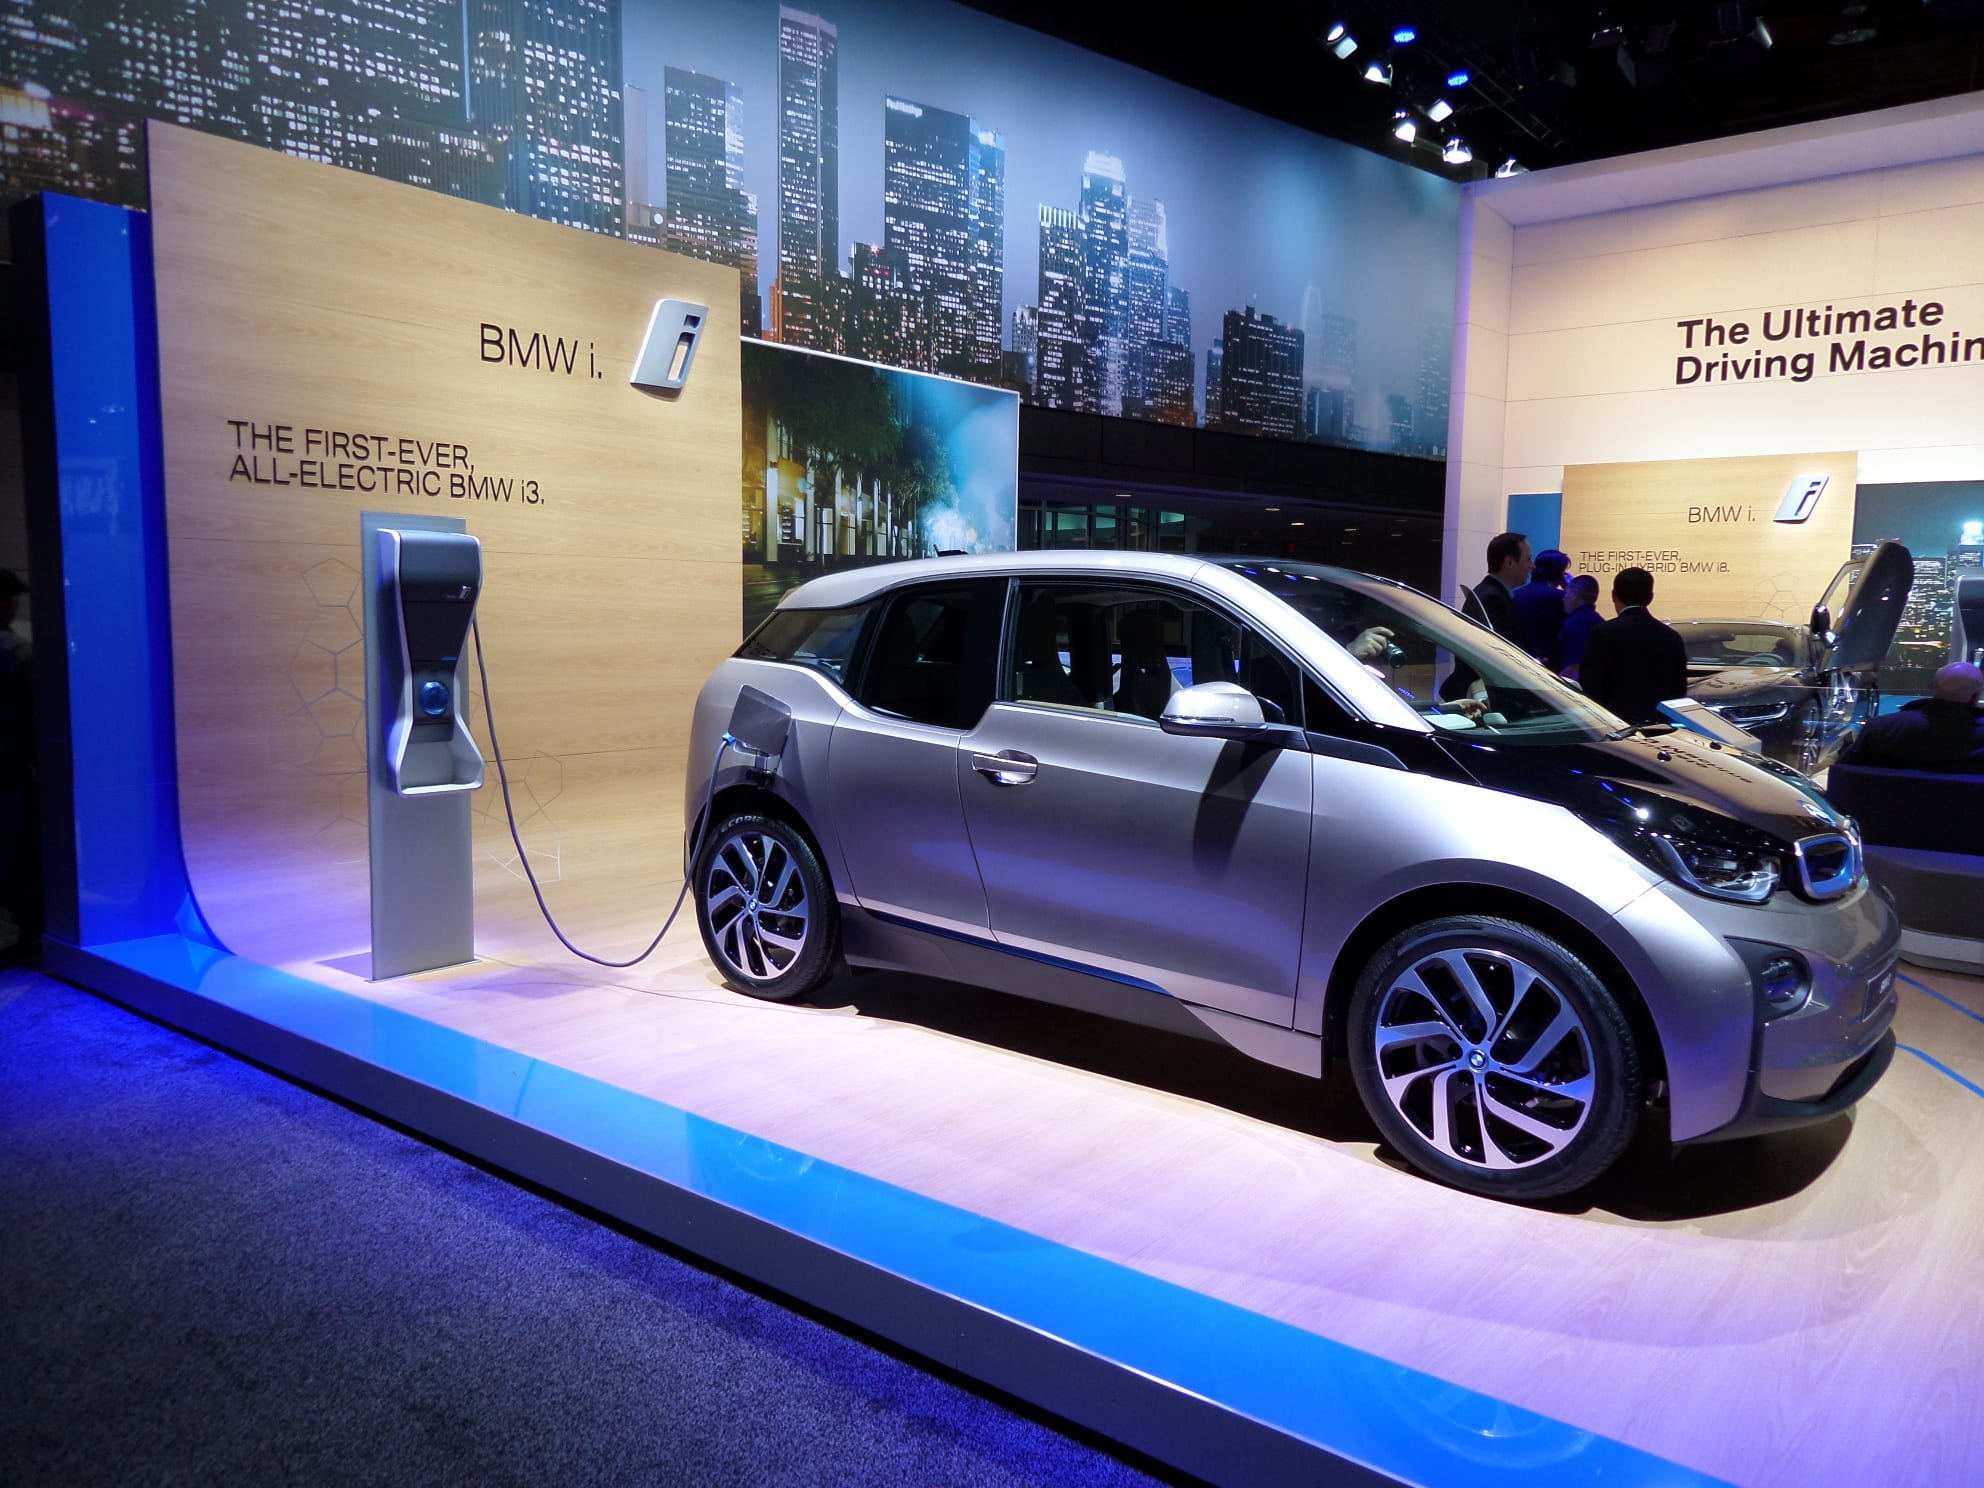 A two-door, black and silver BMW i3 electric car. Side view.